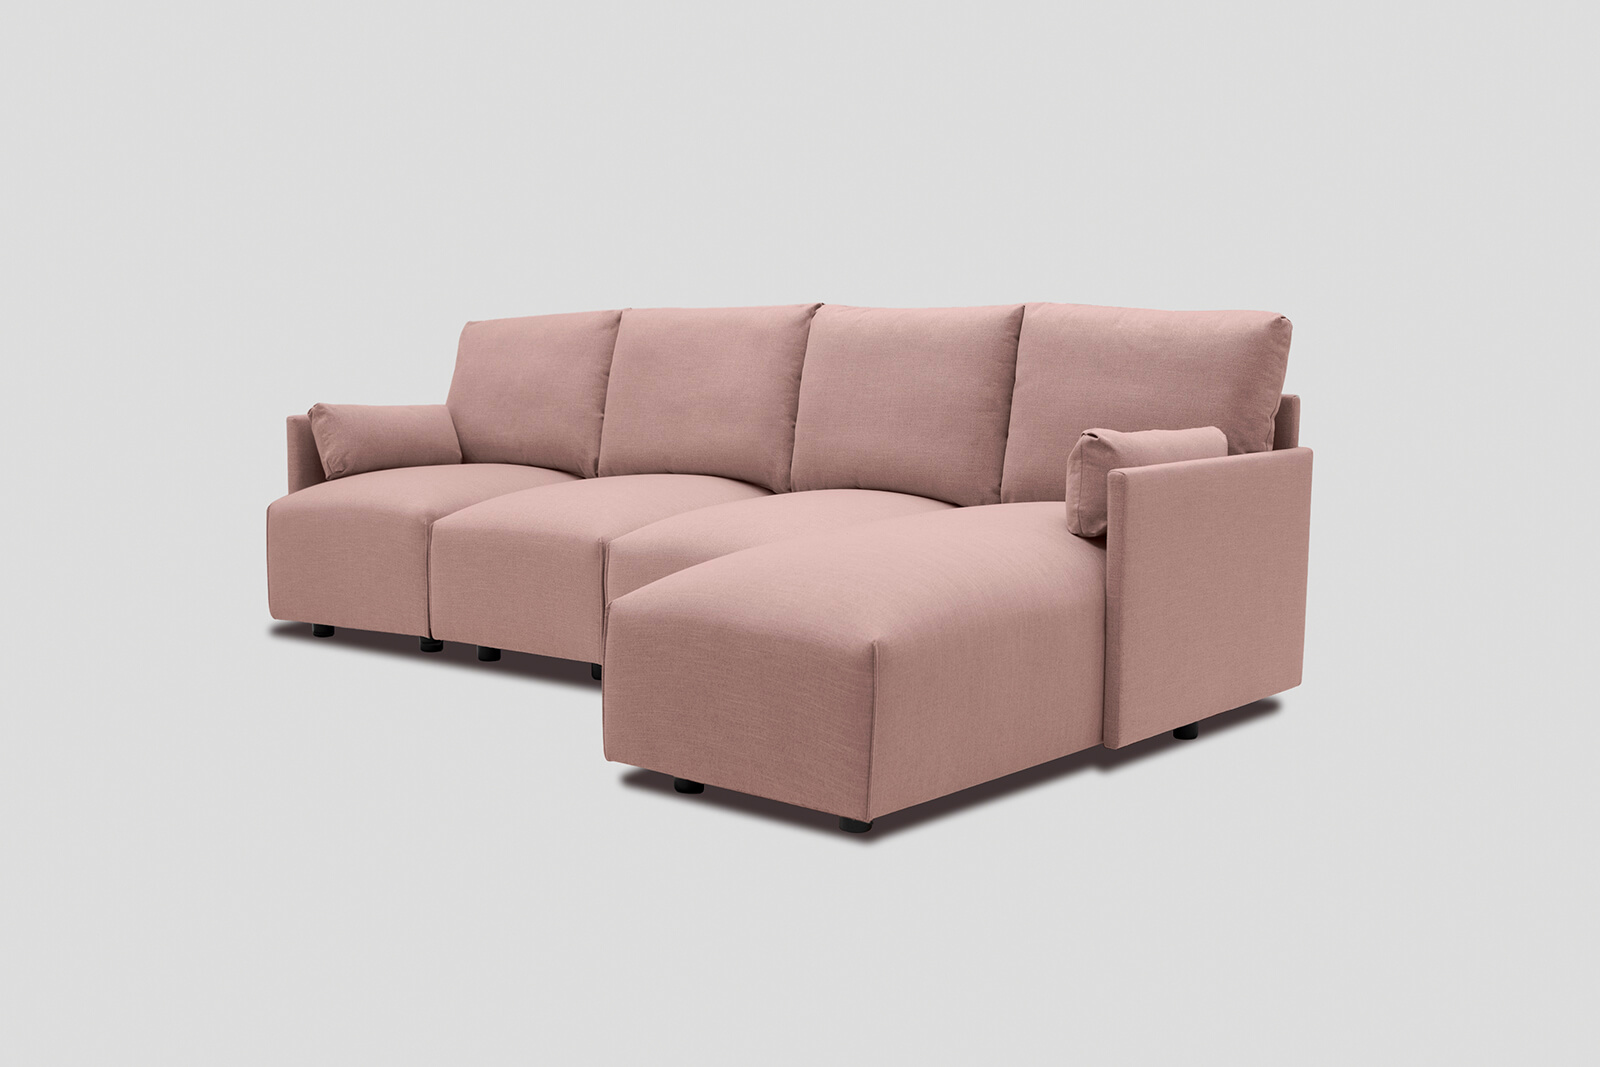 HB04-large-chaise-sofa-rosewater-3q-right